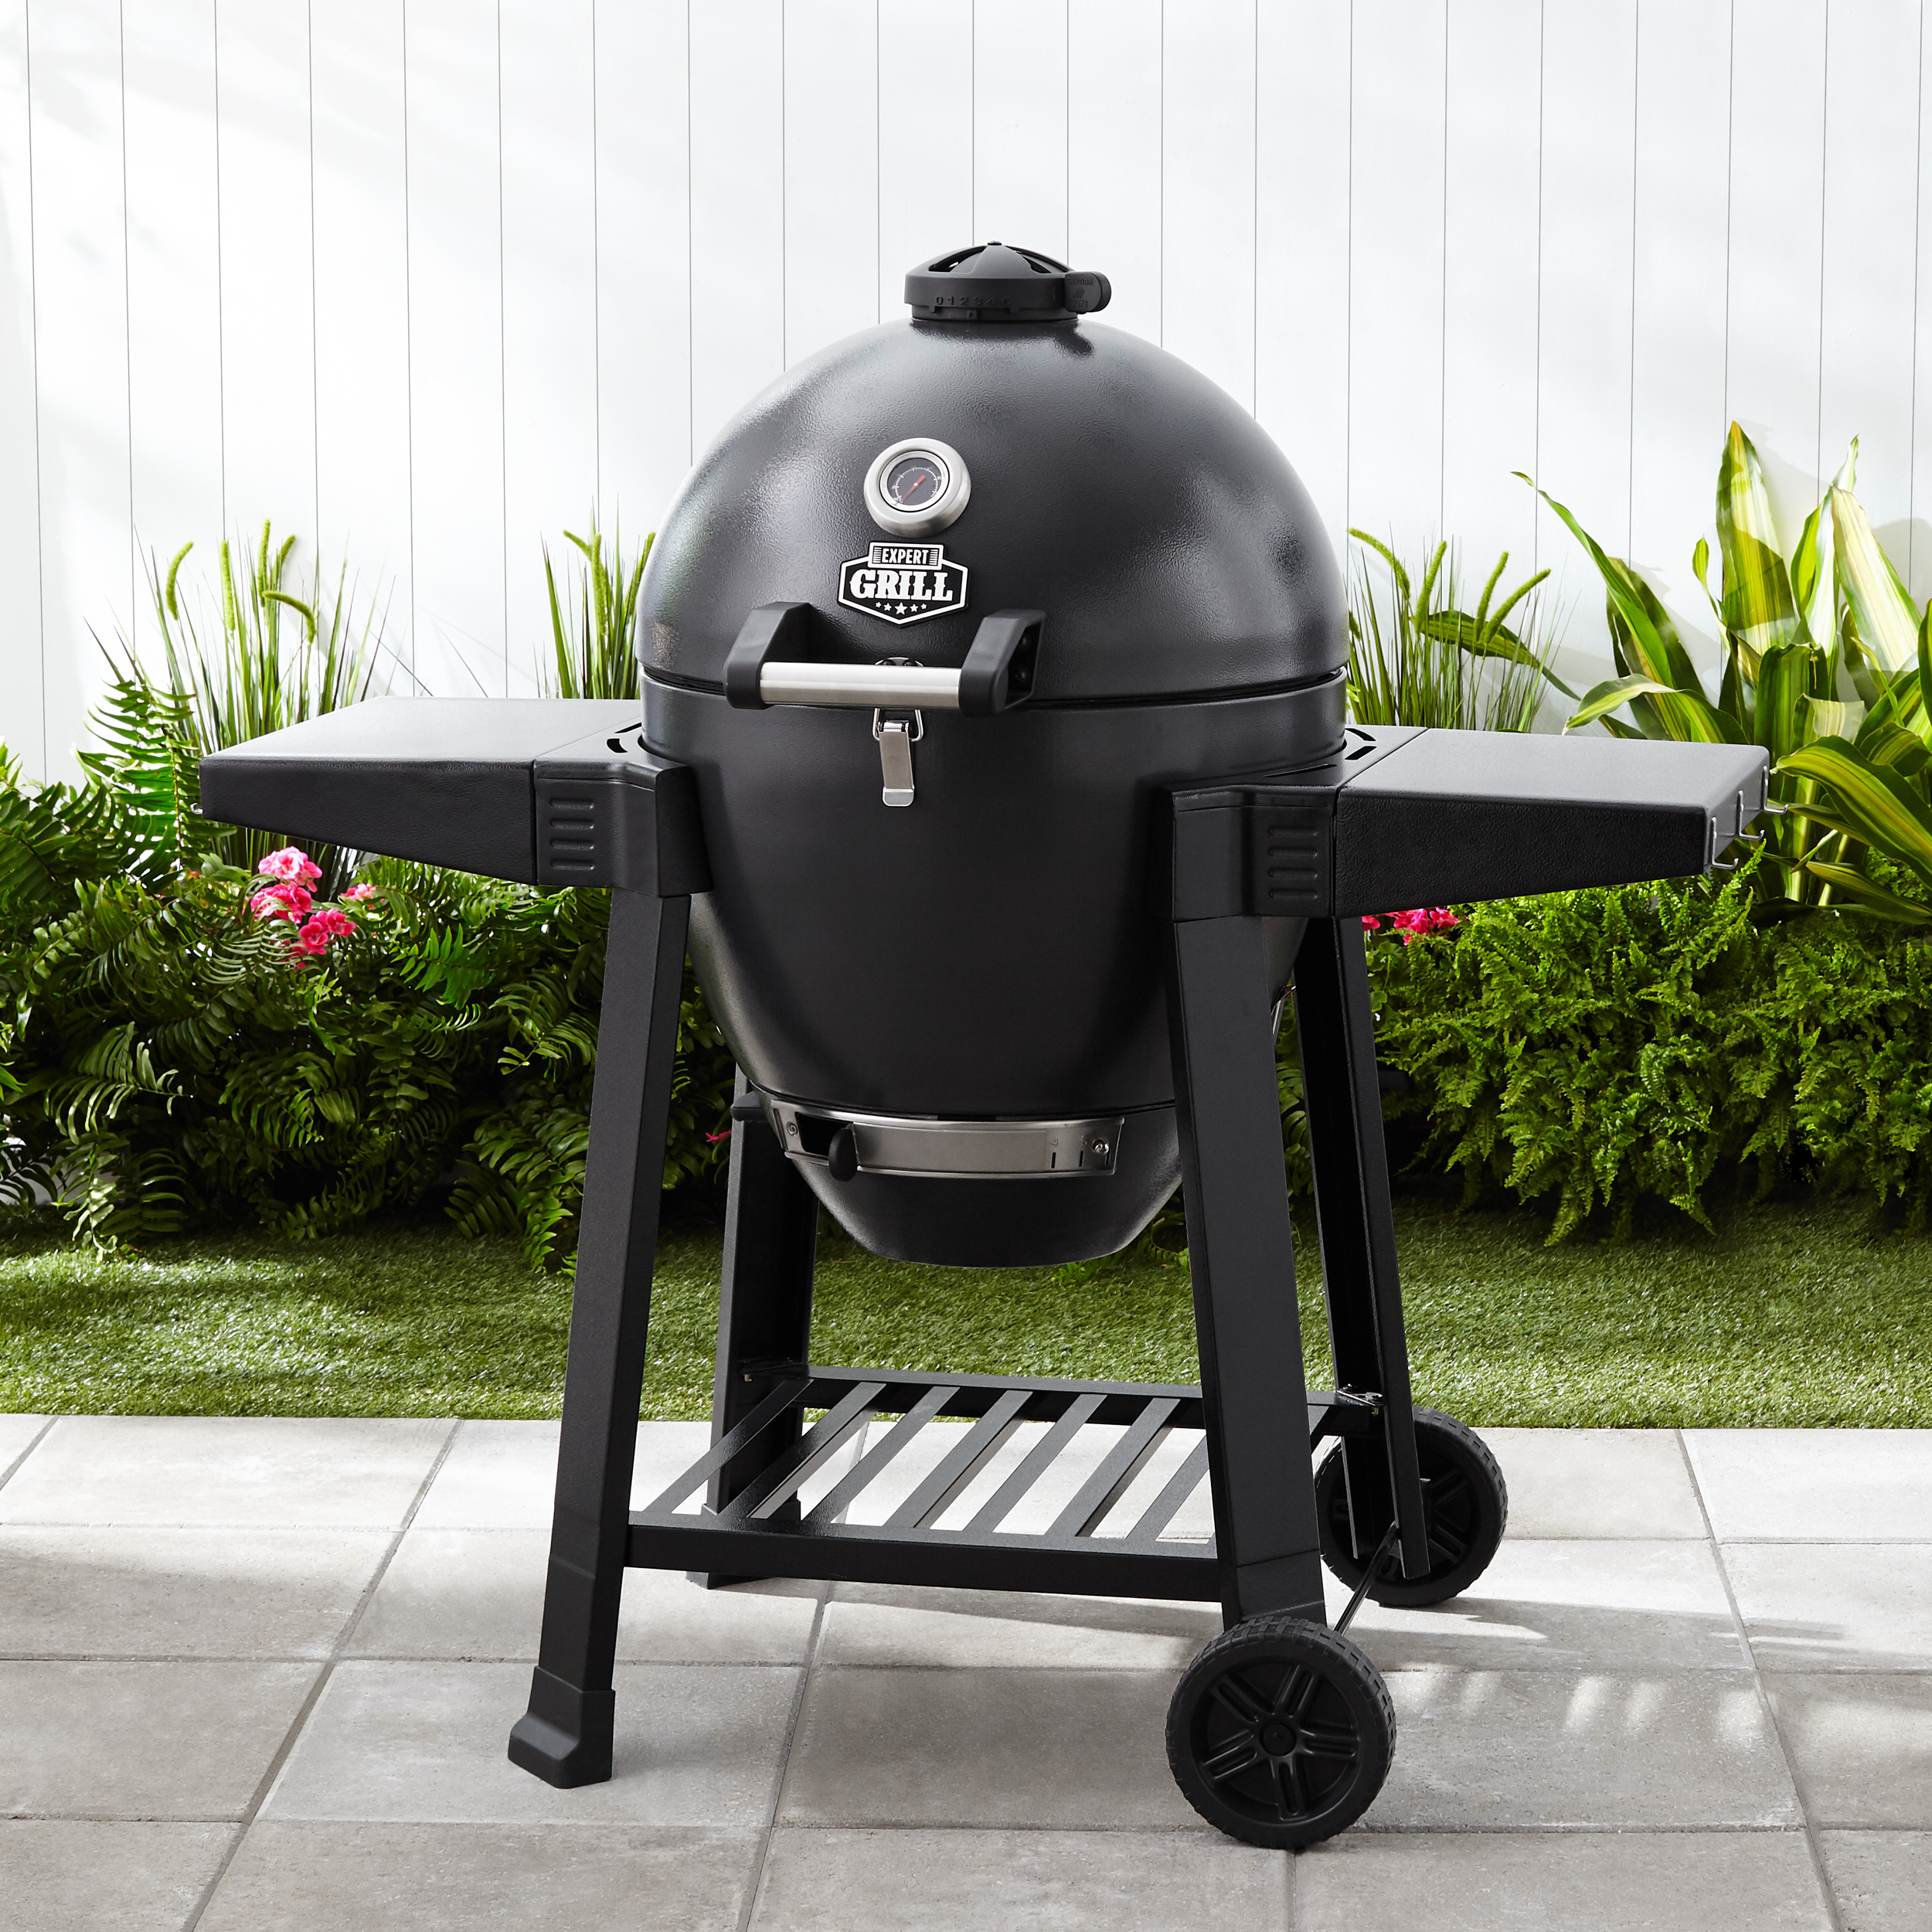 Expert Grill Kamado Charcoal Grill - image 3 of 12